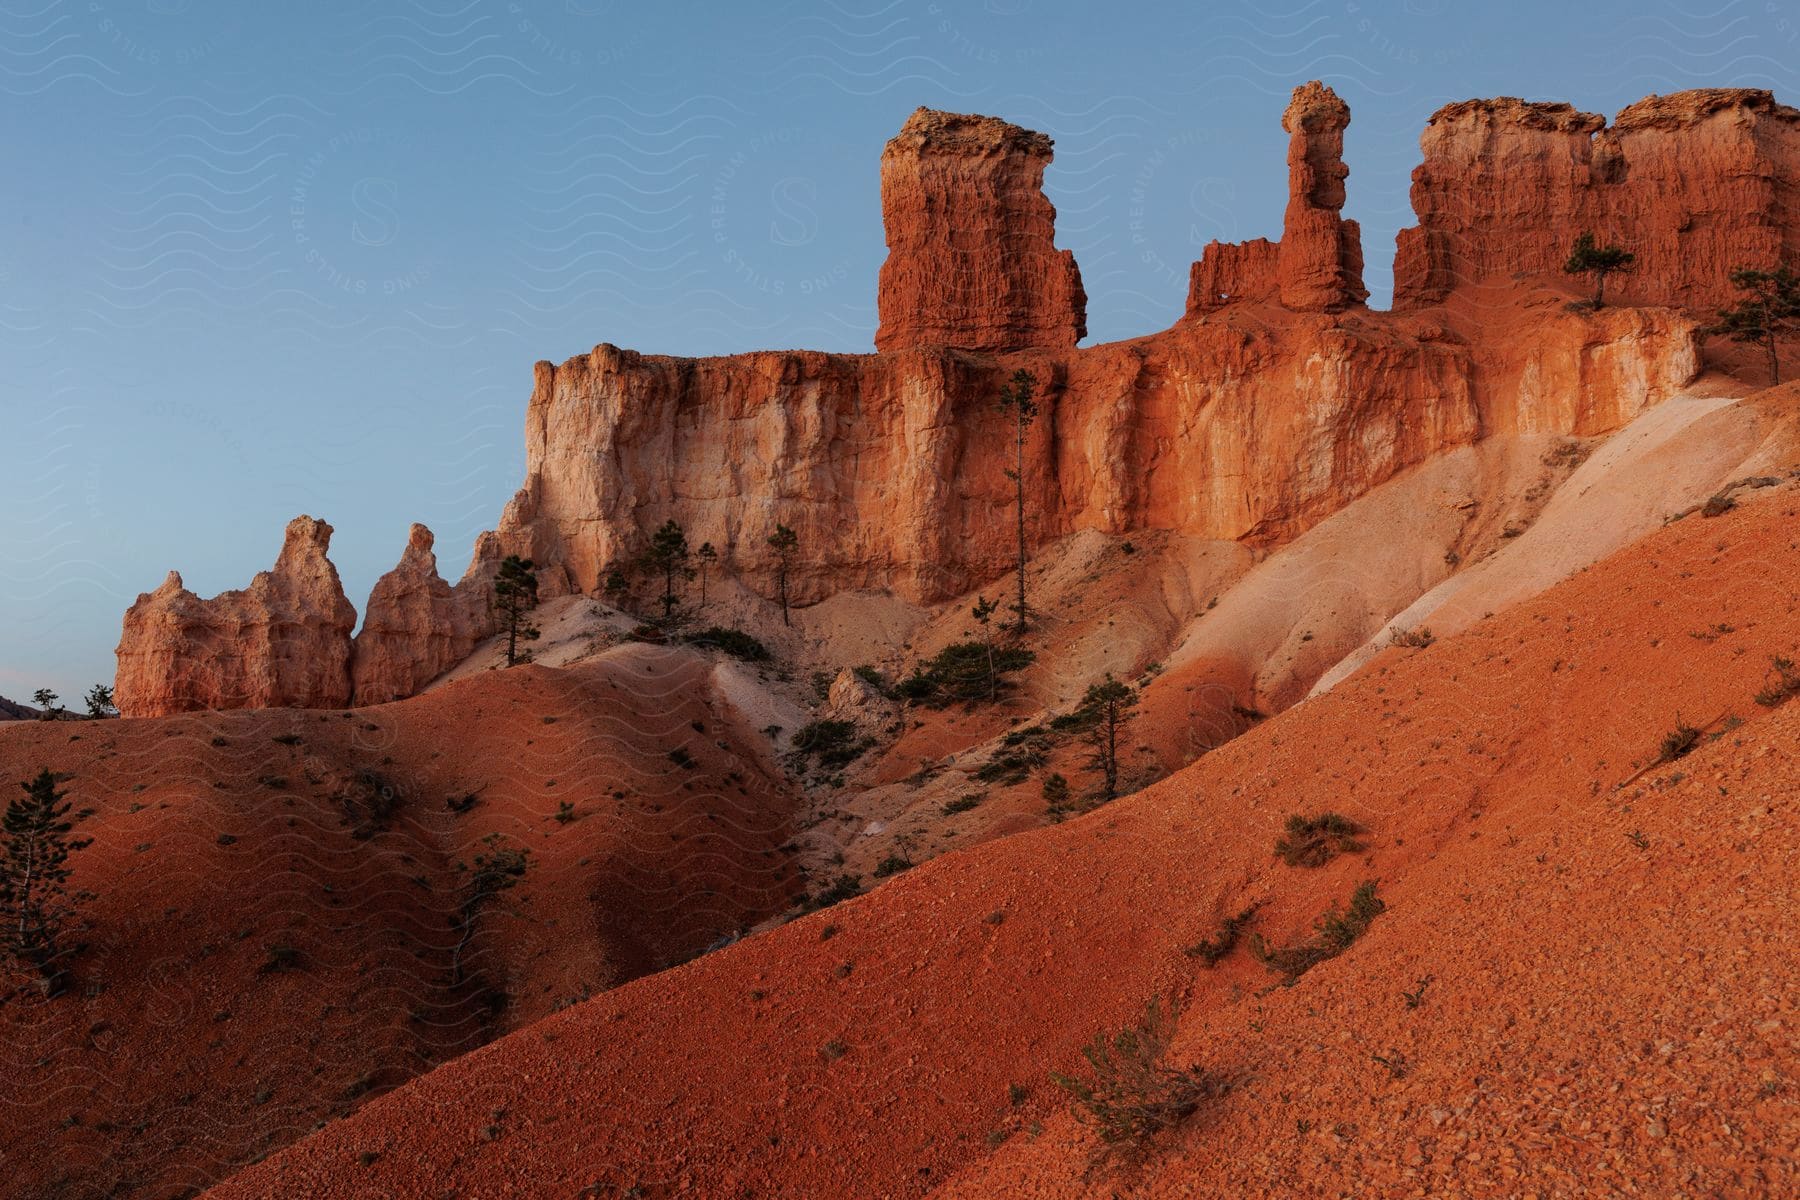 Red rock formations stand high on the desert canyons under a clear sky